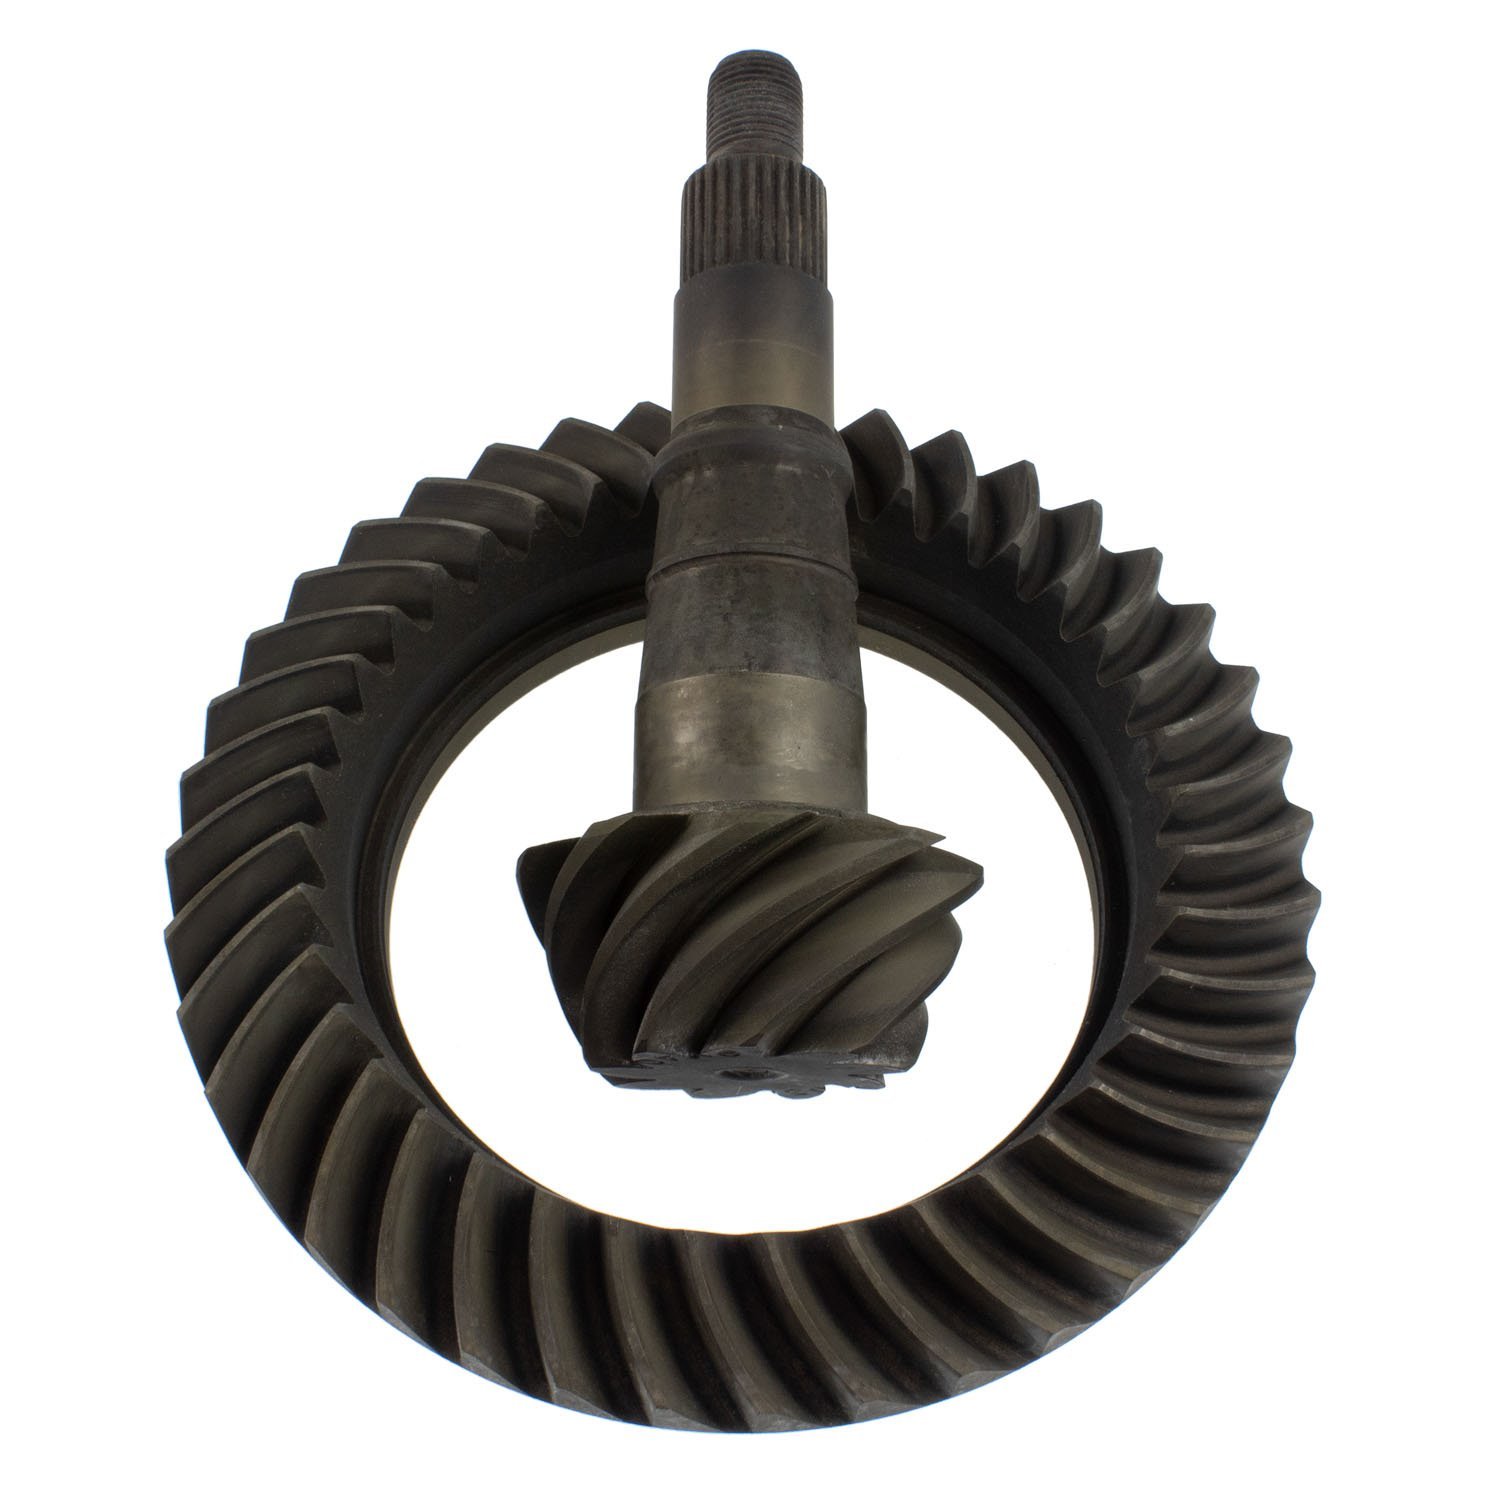 4.44 Ratio Front Differential Ring and Pinion Gear Set for 2014-2018 Ram 2500, 3500 Trucks w/Chrysler 9.25 in. 12 Bolt